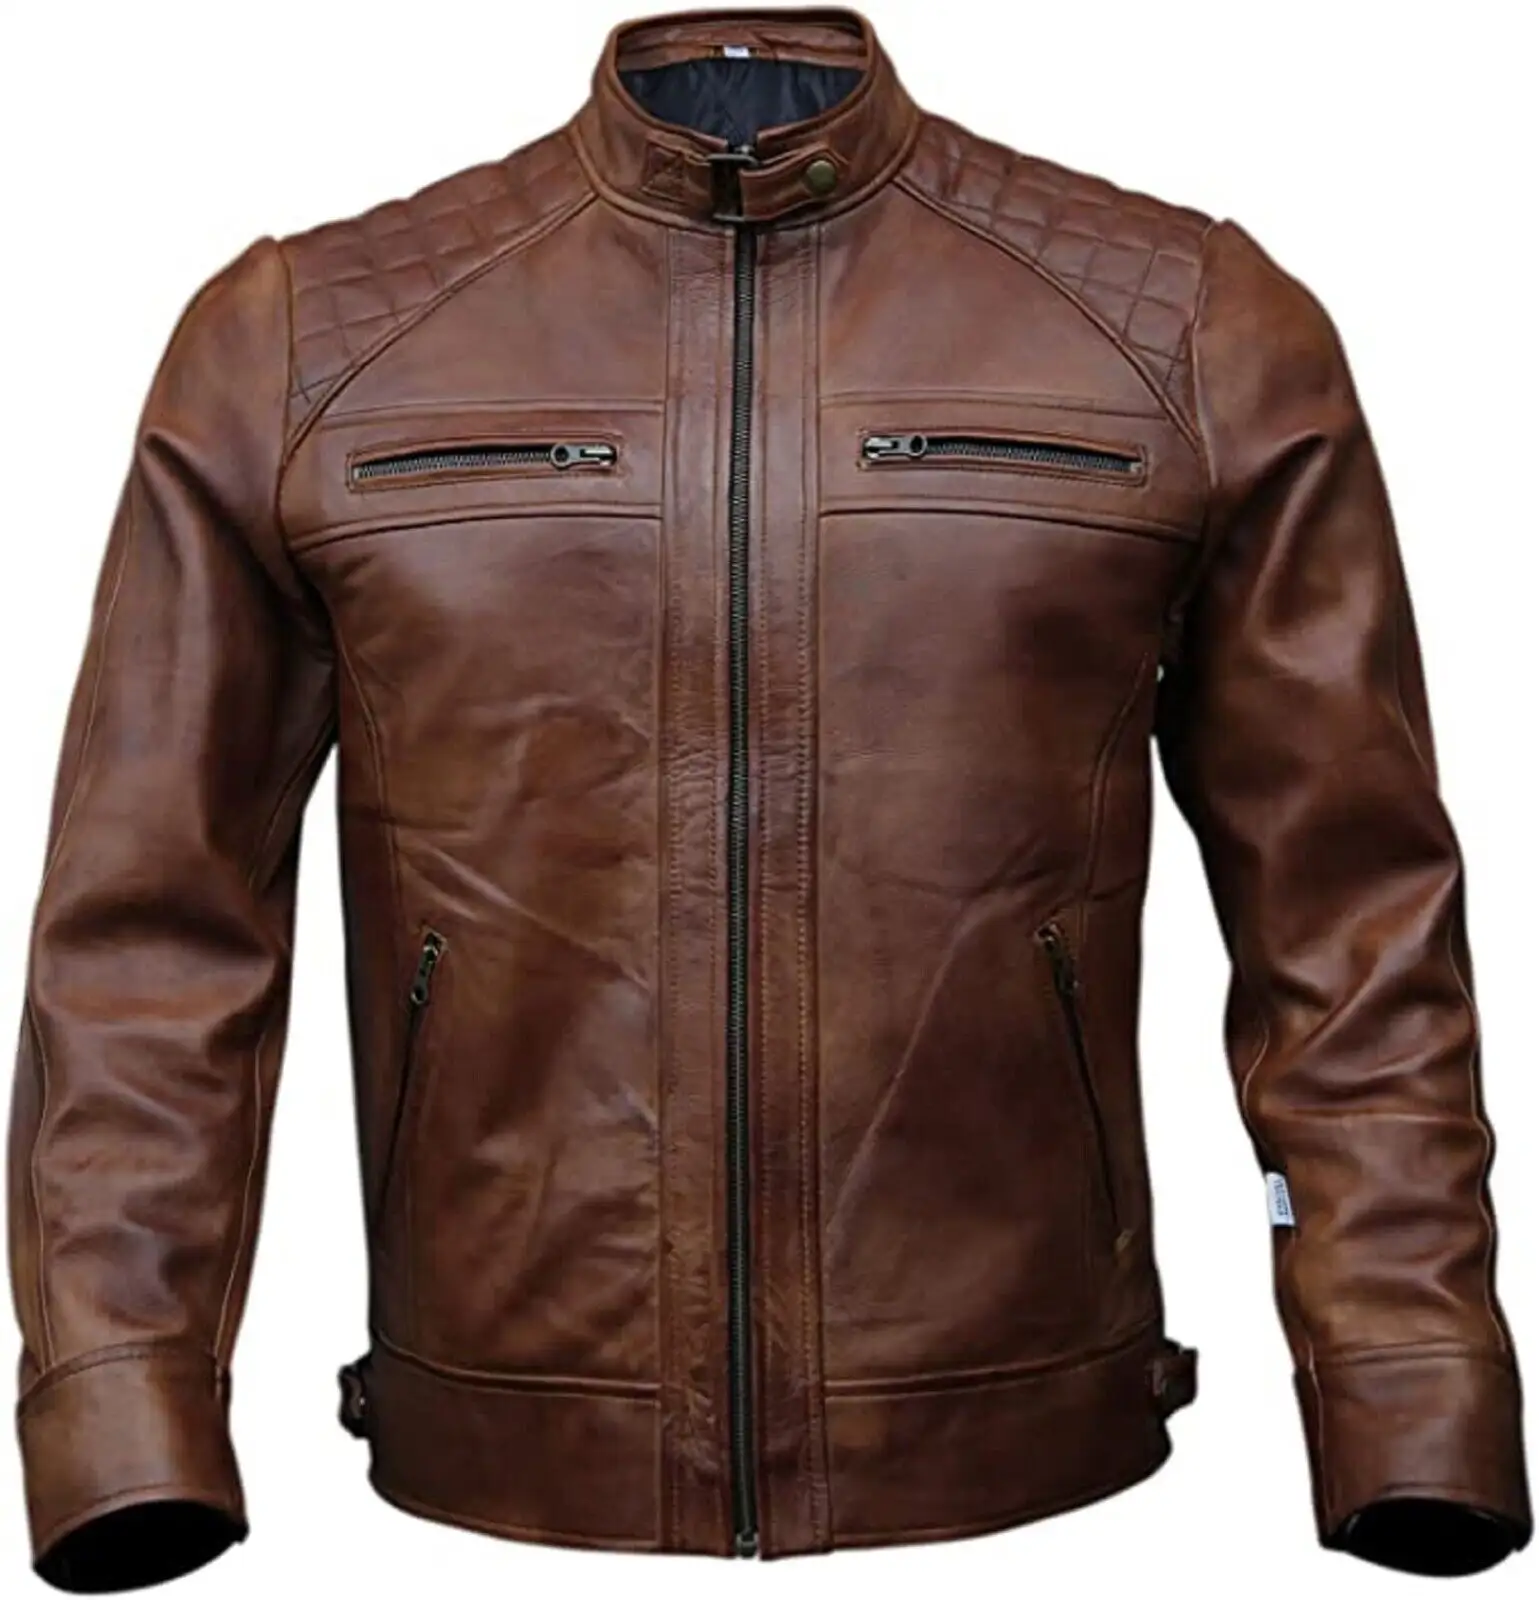 Vintage Men's Genuine Leather Biker Jacket In Motorcycle Style With customize logo on it